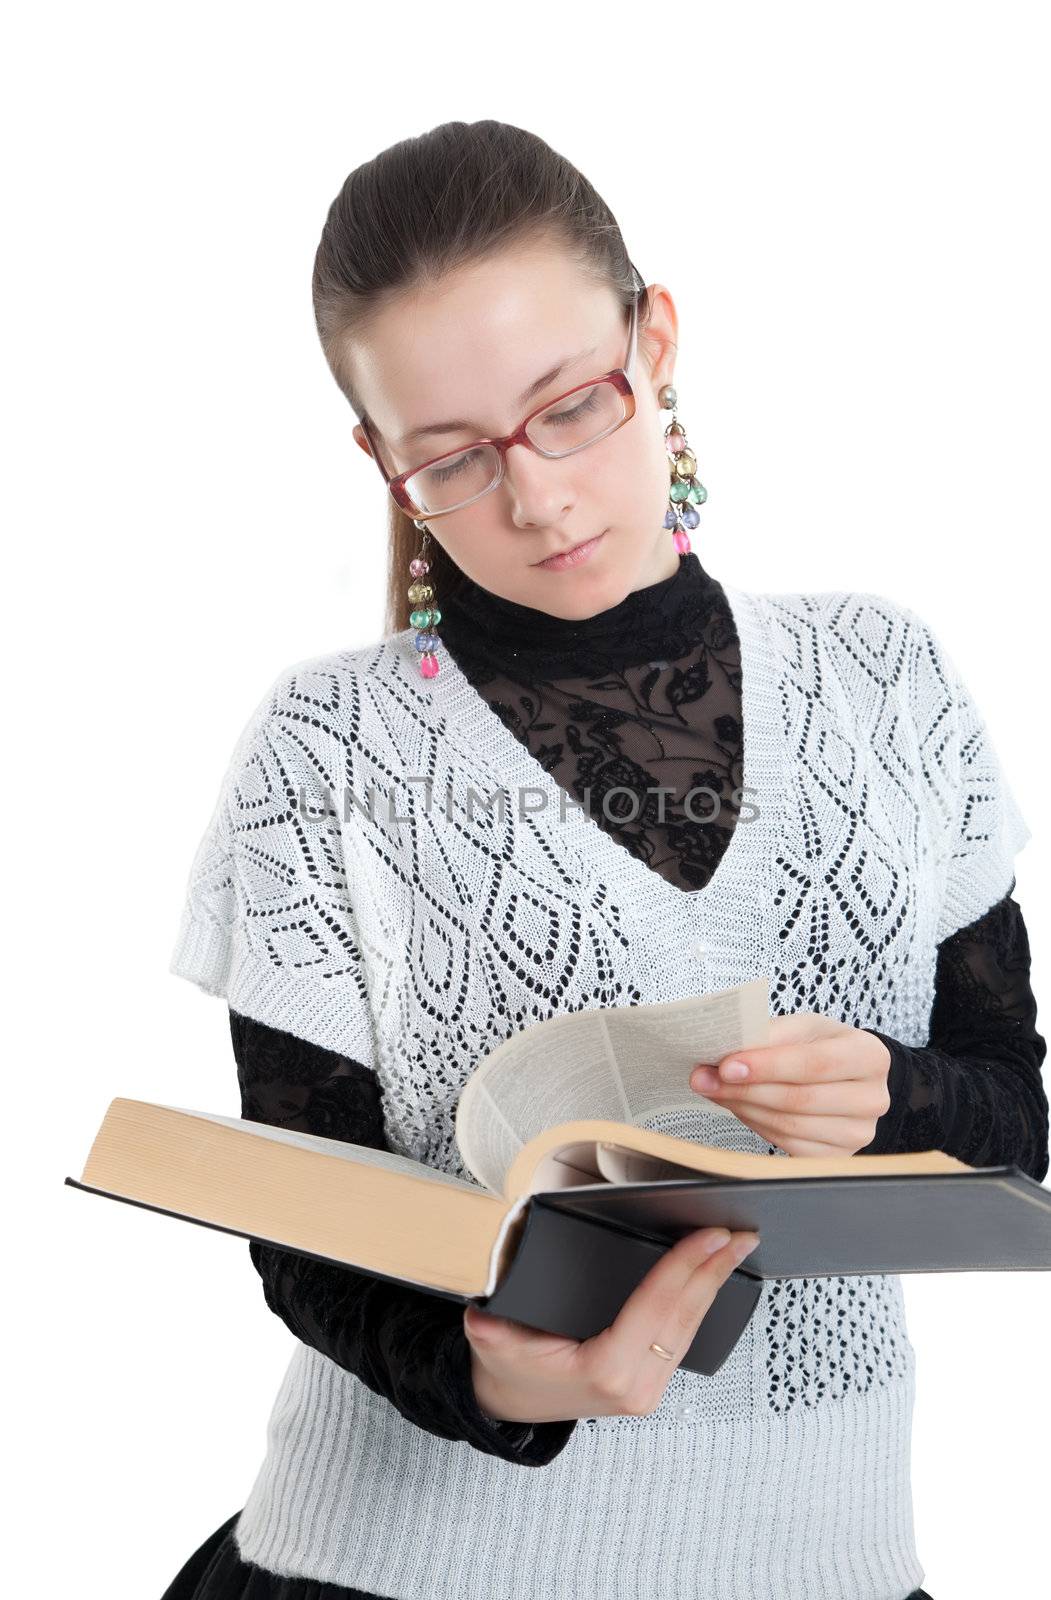 Girl with glasses reading a book.  Isolated on white background